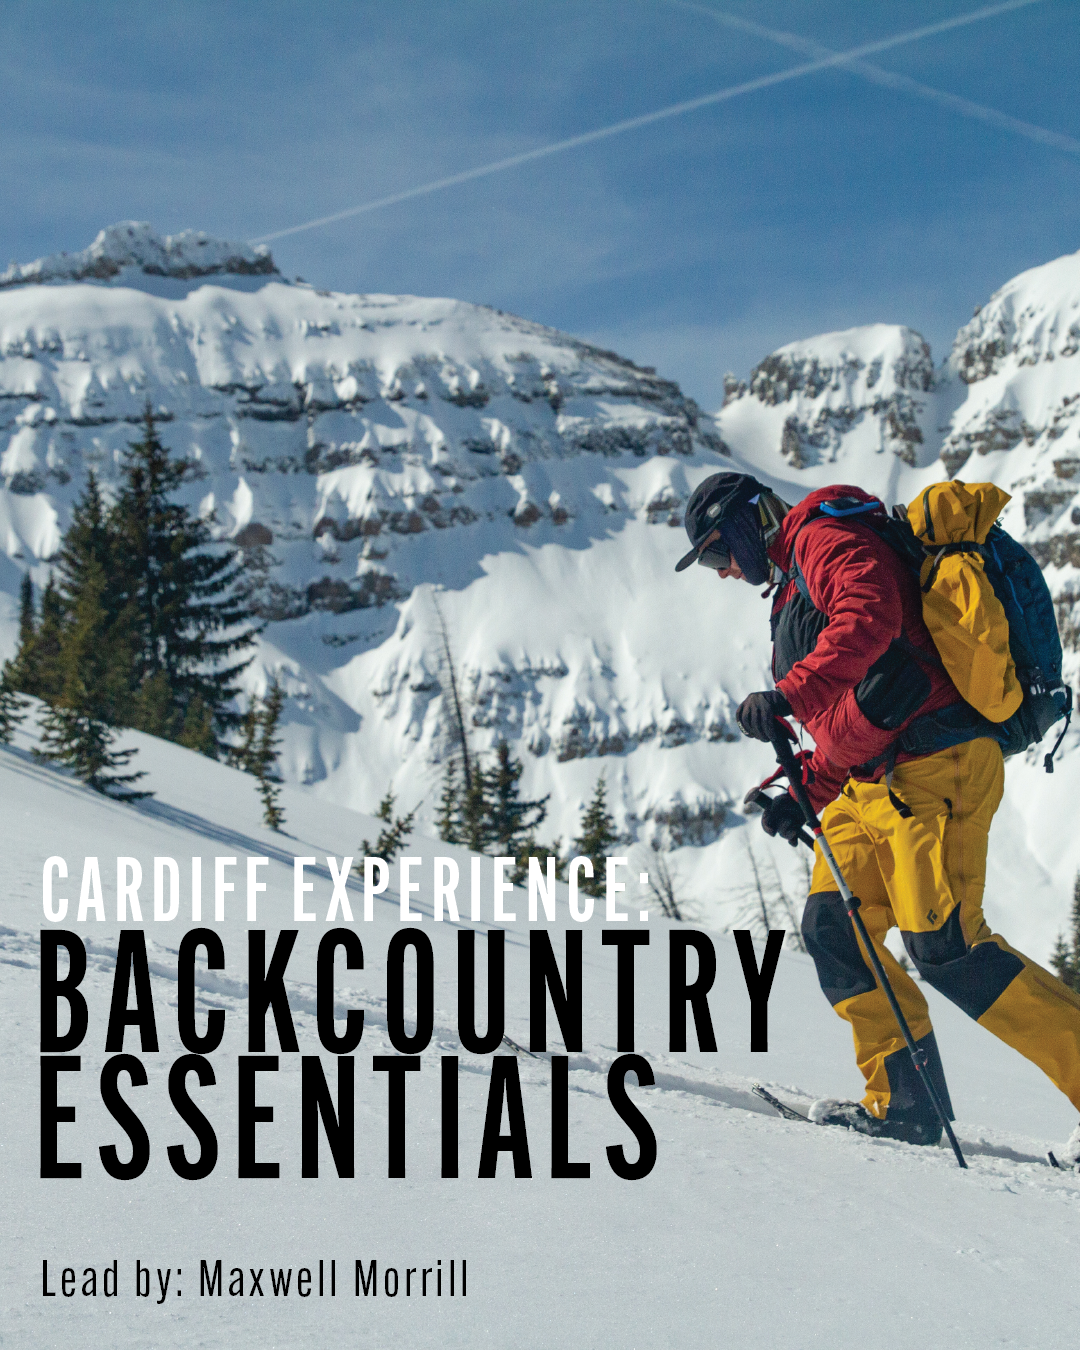 Ski Touring - an active backcountry experience